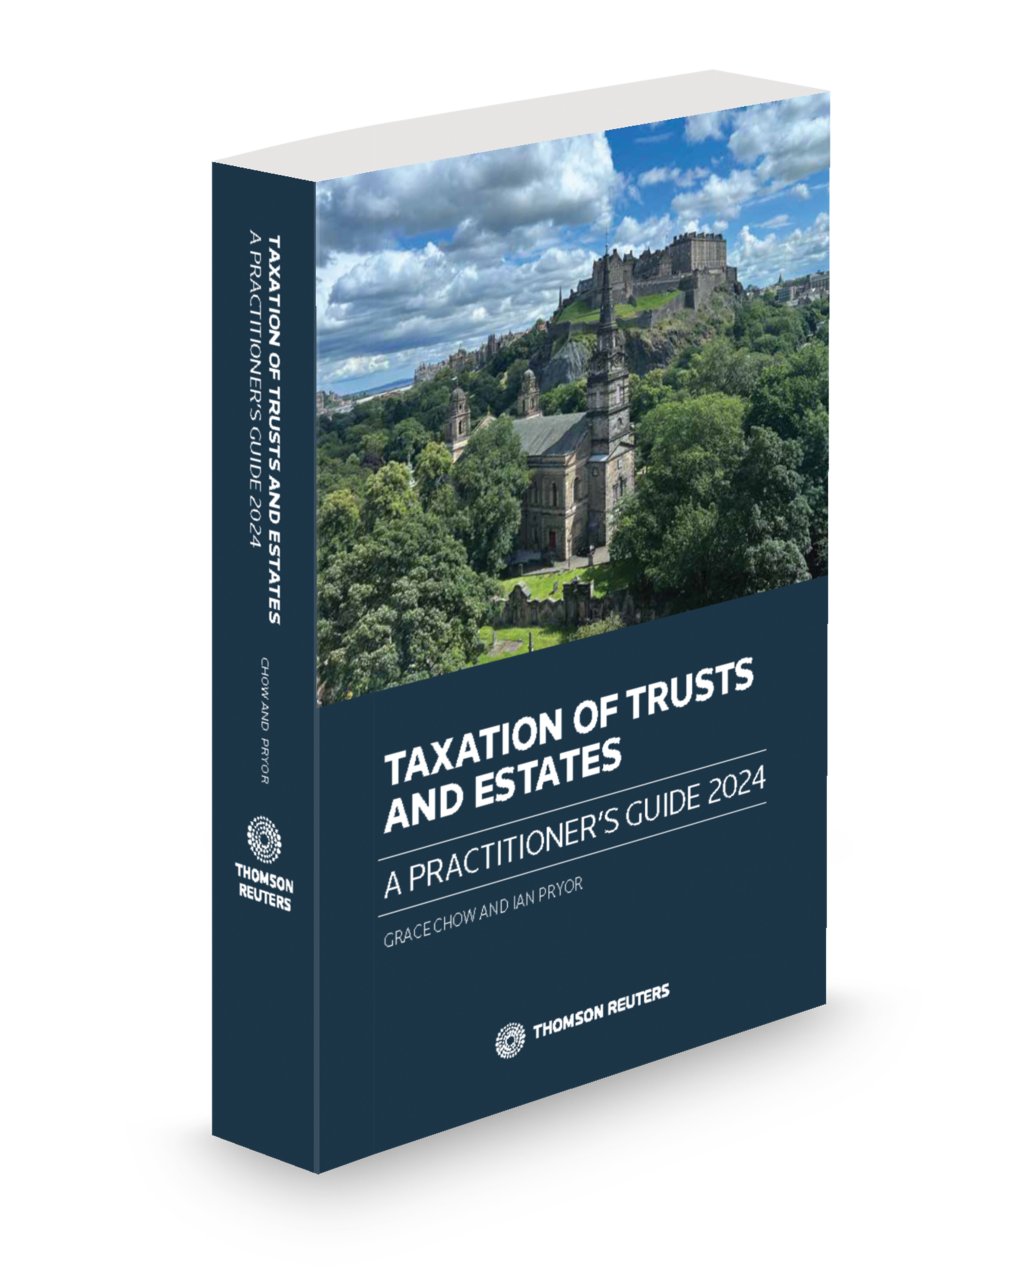 Cover image of Taxation of Trusts and Estates: A Practitioner's Guide 2024